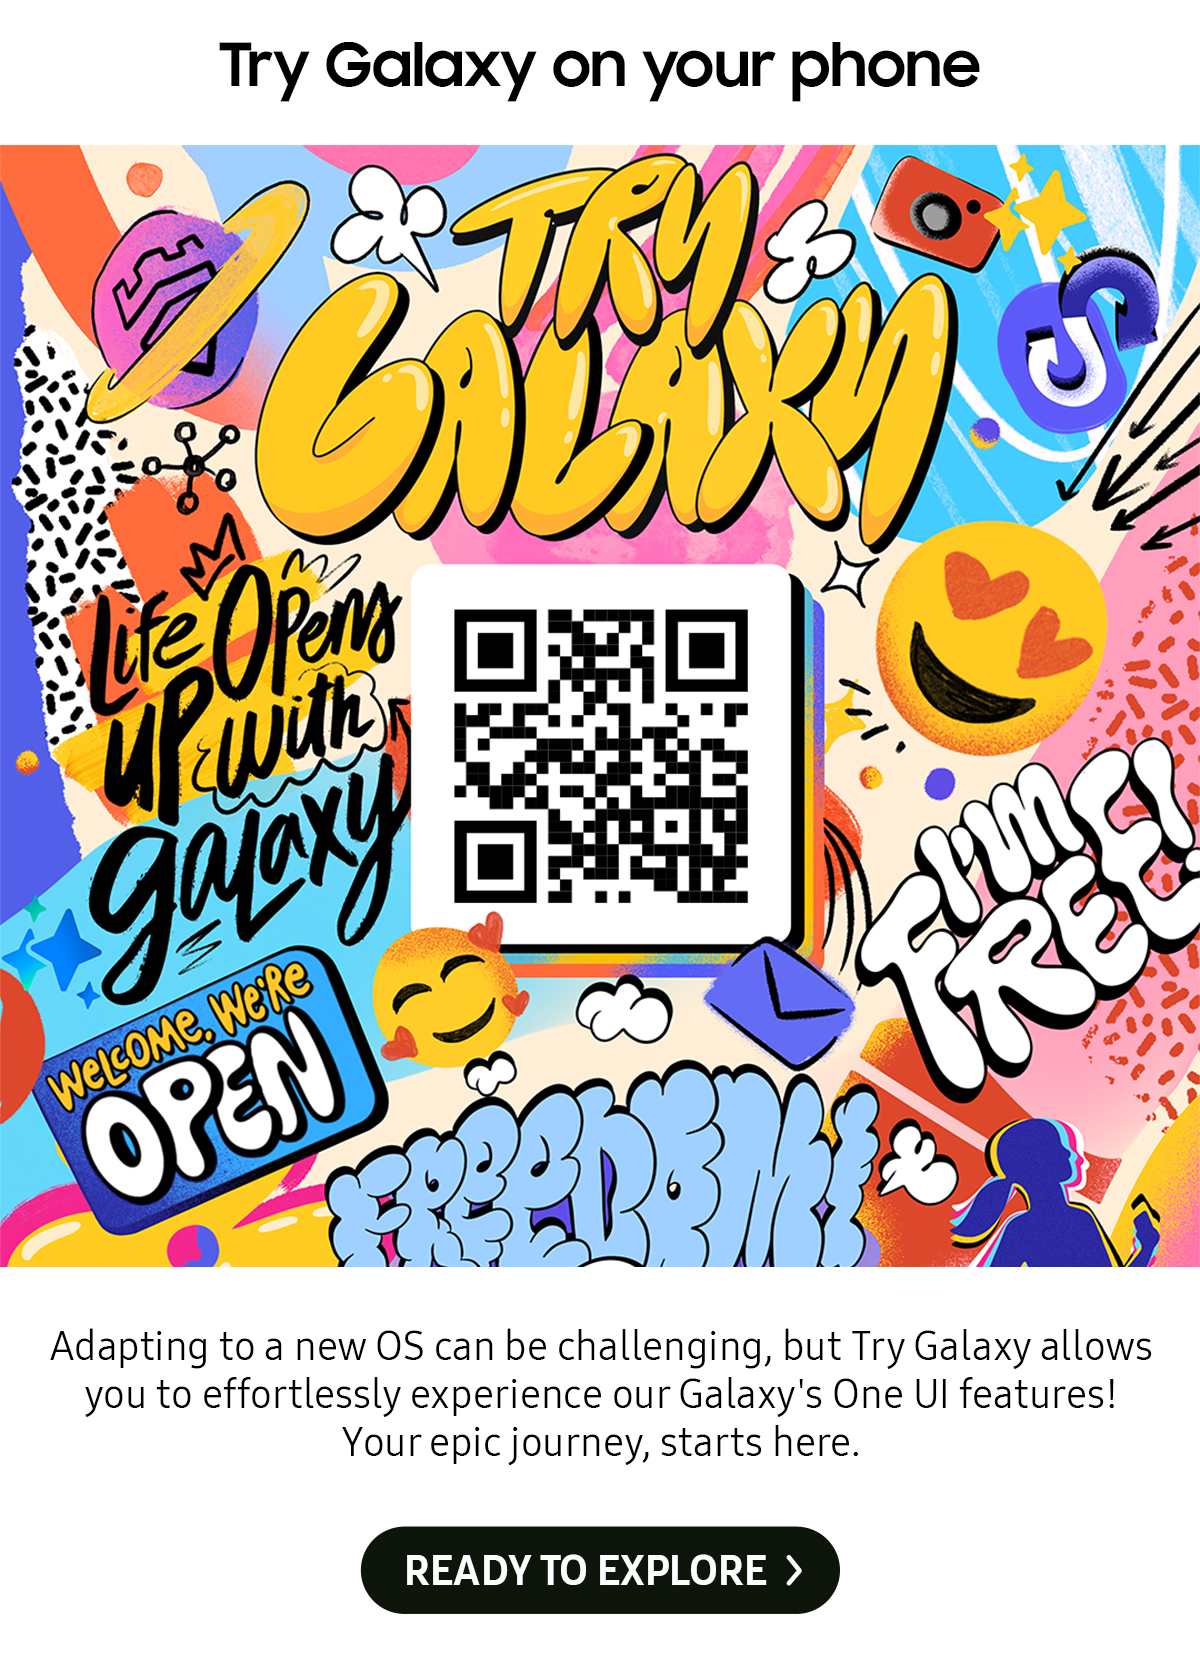 Try Galaxy on your phone | Adapting to a new OS can be challenging, but Try Galaxy allows you to effortlessly experience our Galaxy's One Ul features! Your epic journey, starts here.